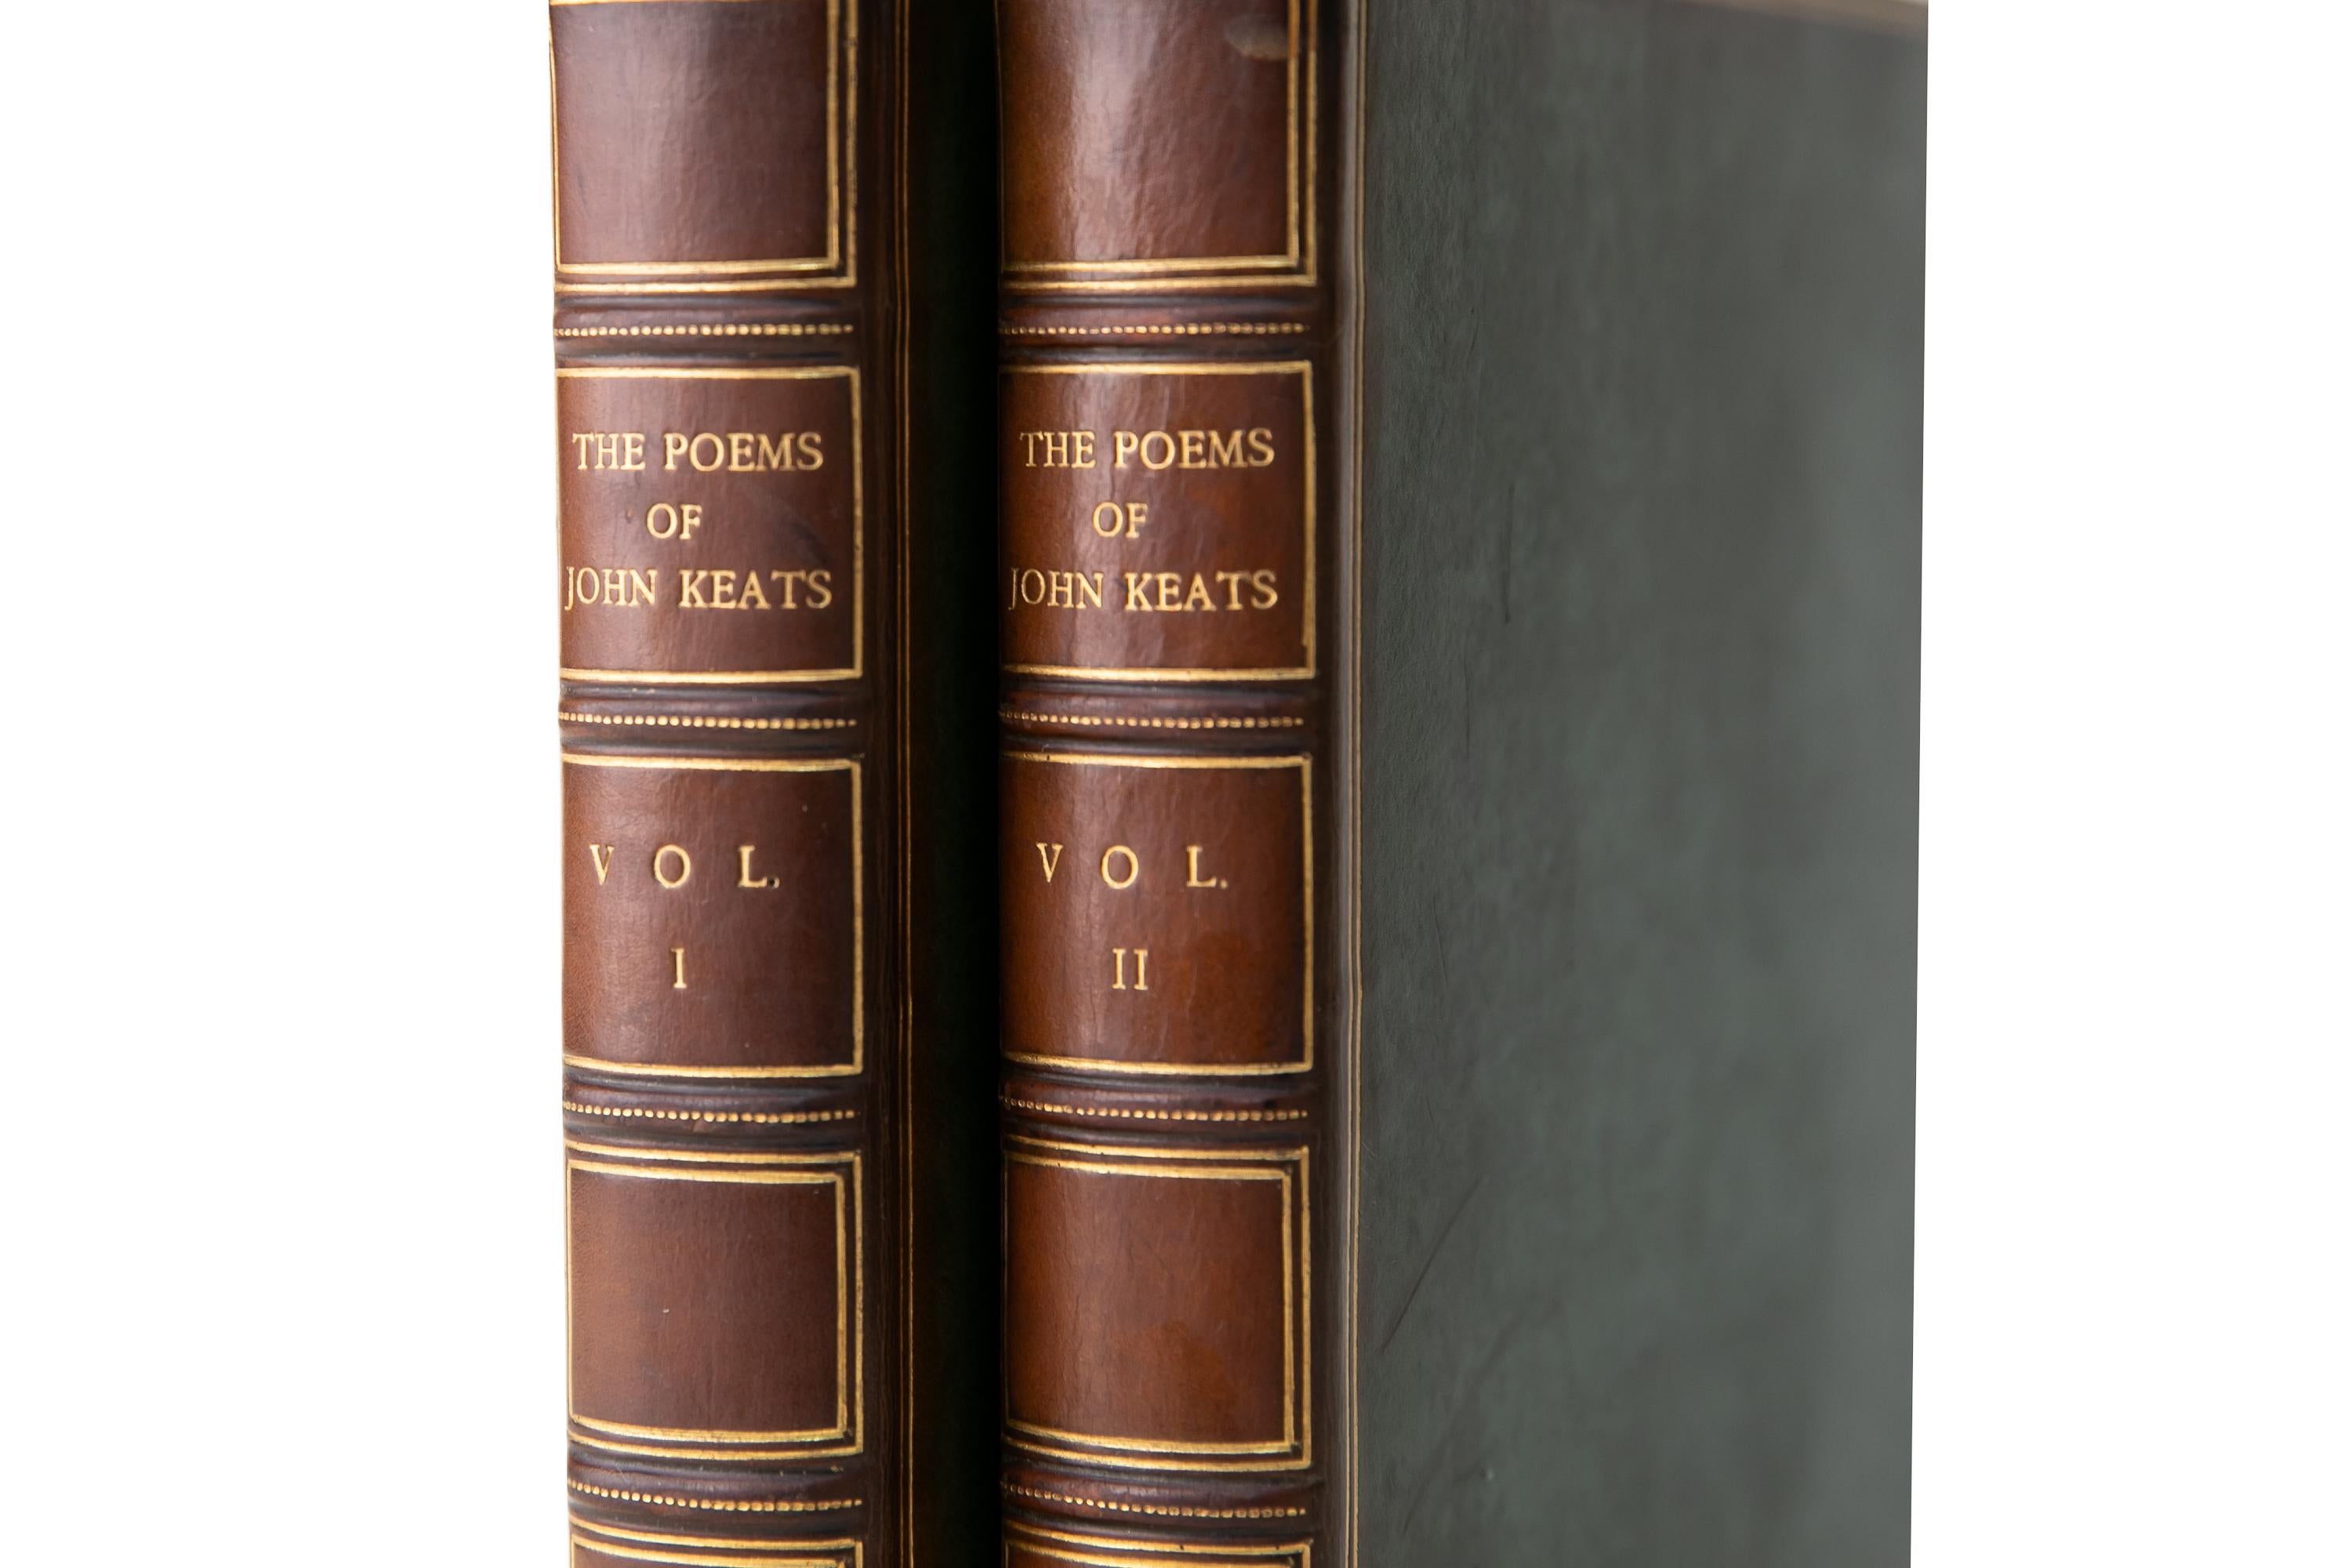 20th Century 2 Volumes. John Keats, The Poems. For Sale